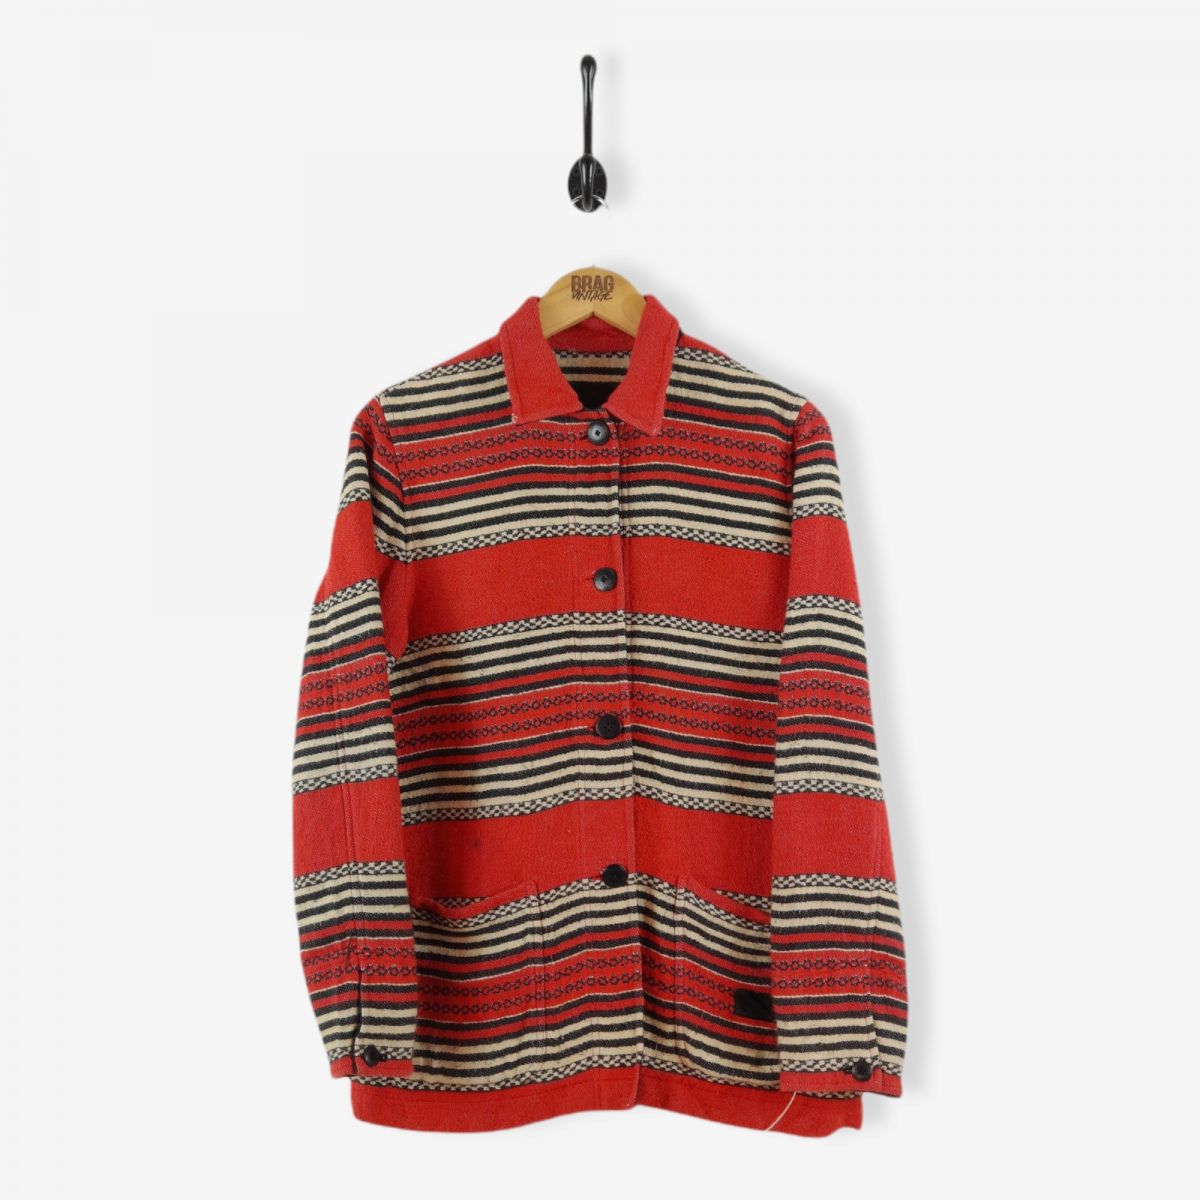 Vintage RALPH LAUREN Striped Jacket Coral Red Small